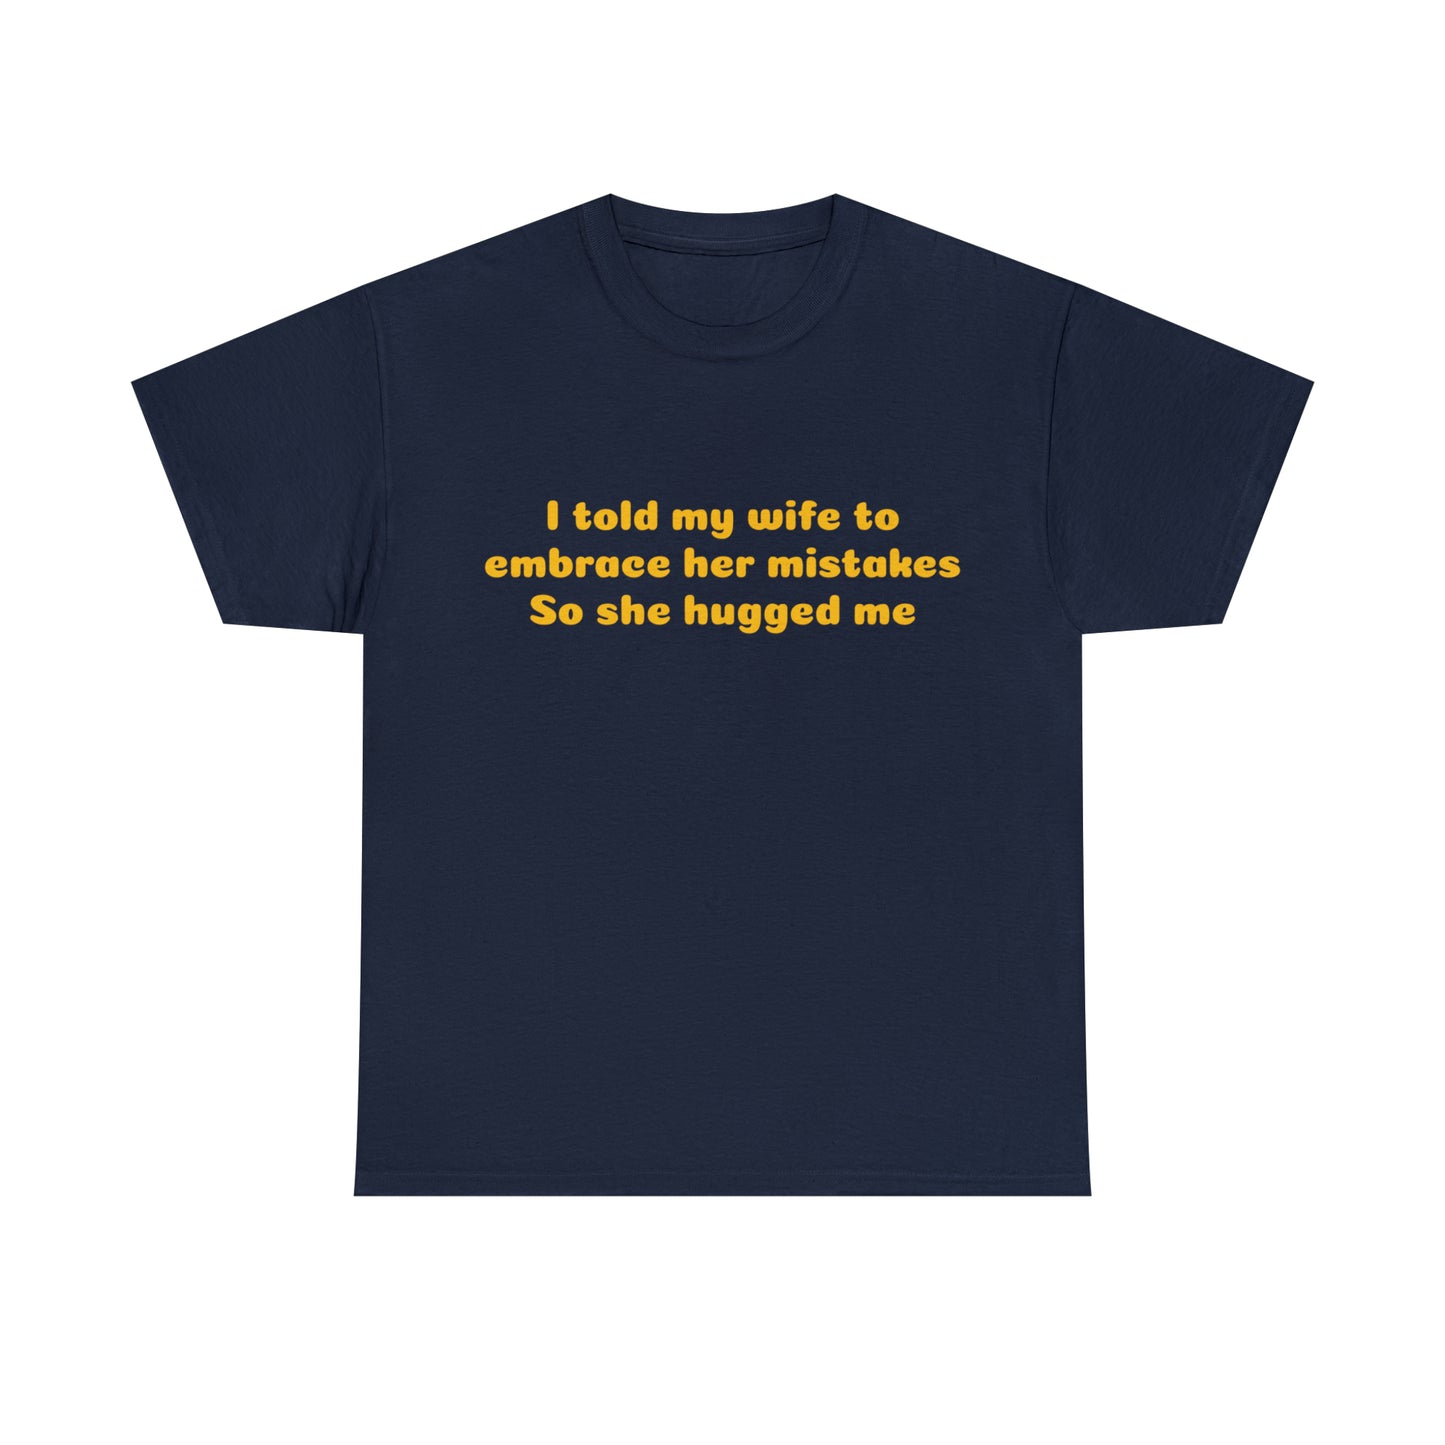 Custom Parody T-shirt, I told my wife to embrace her mistakes, So she hugged me shirt design